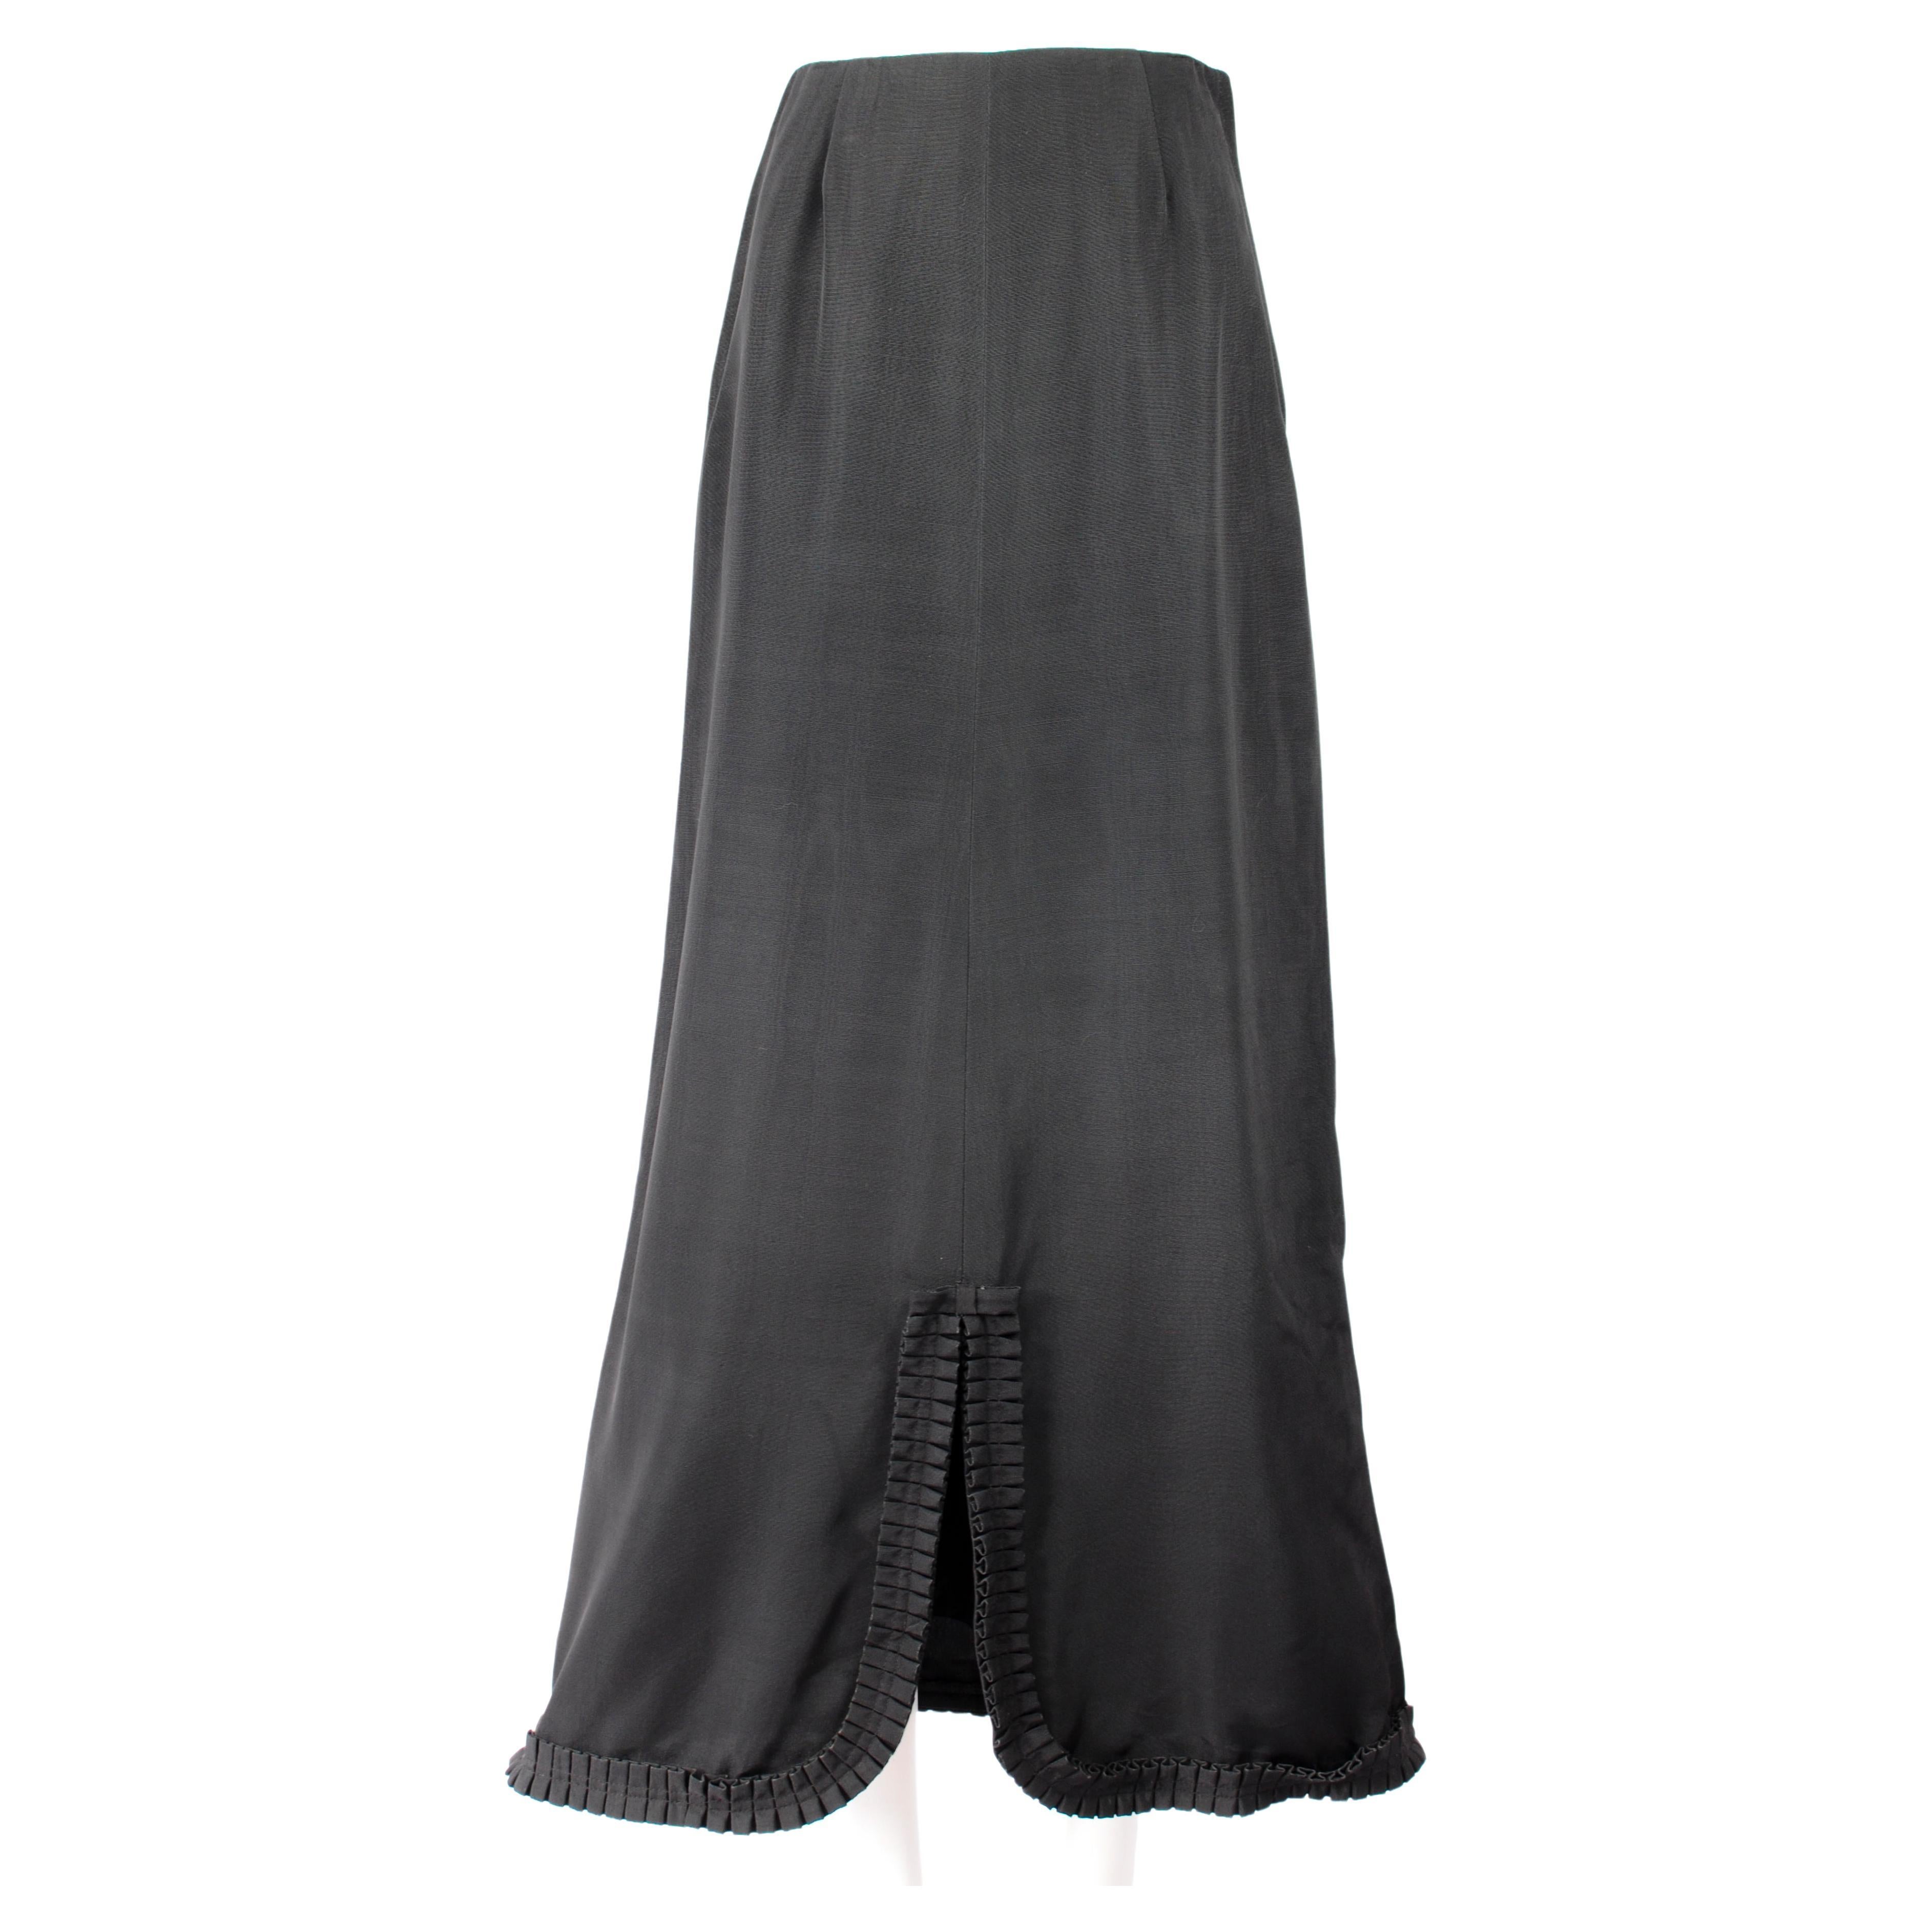 Mary Quant Ginger Group Maxi Skirt A-Line with Bow Ruffle Hem 1960s For Sale